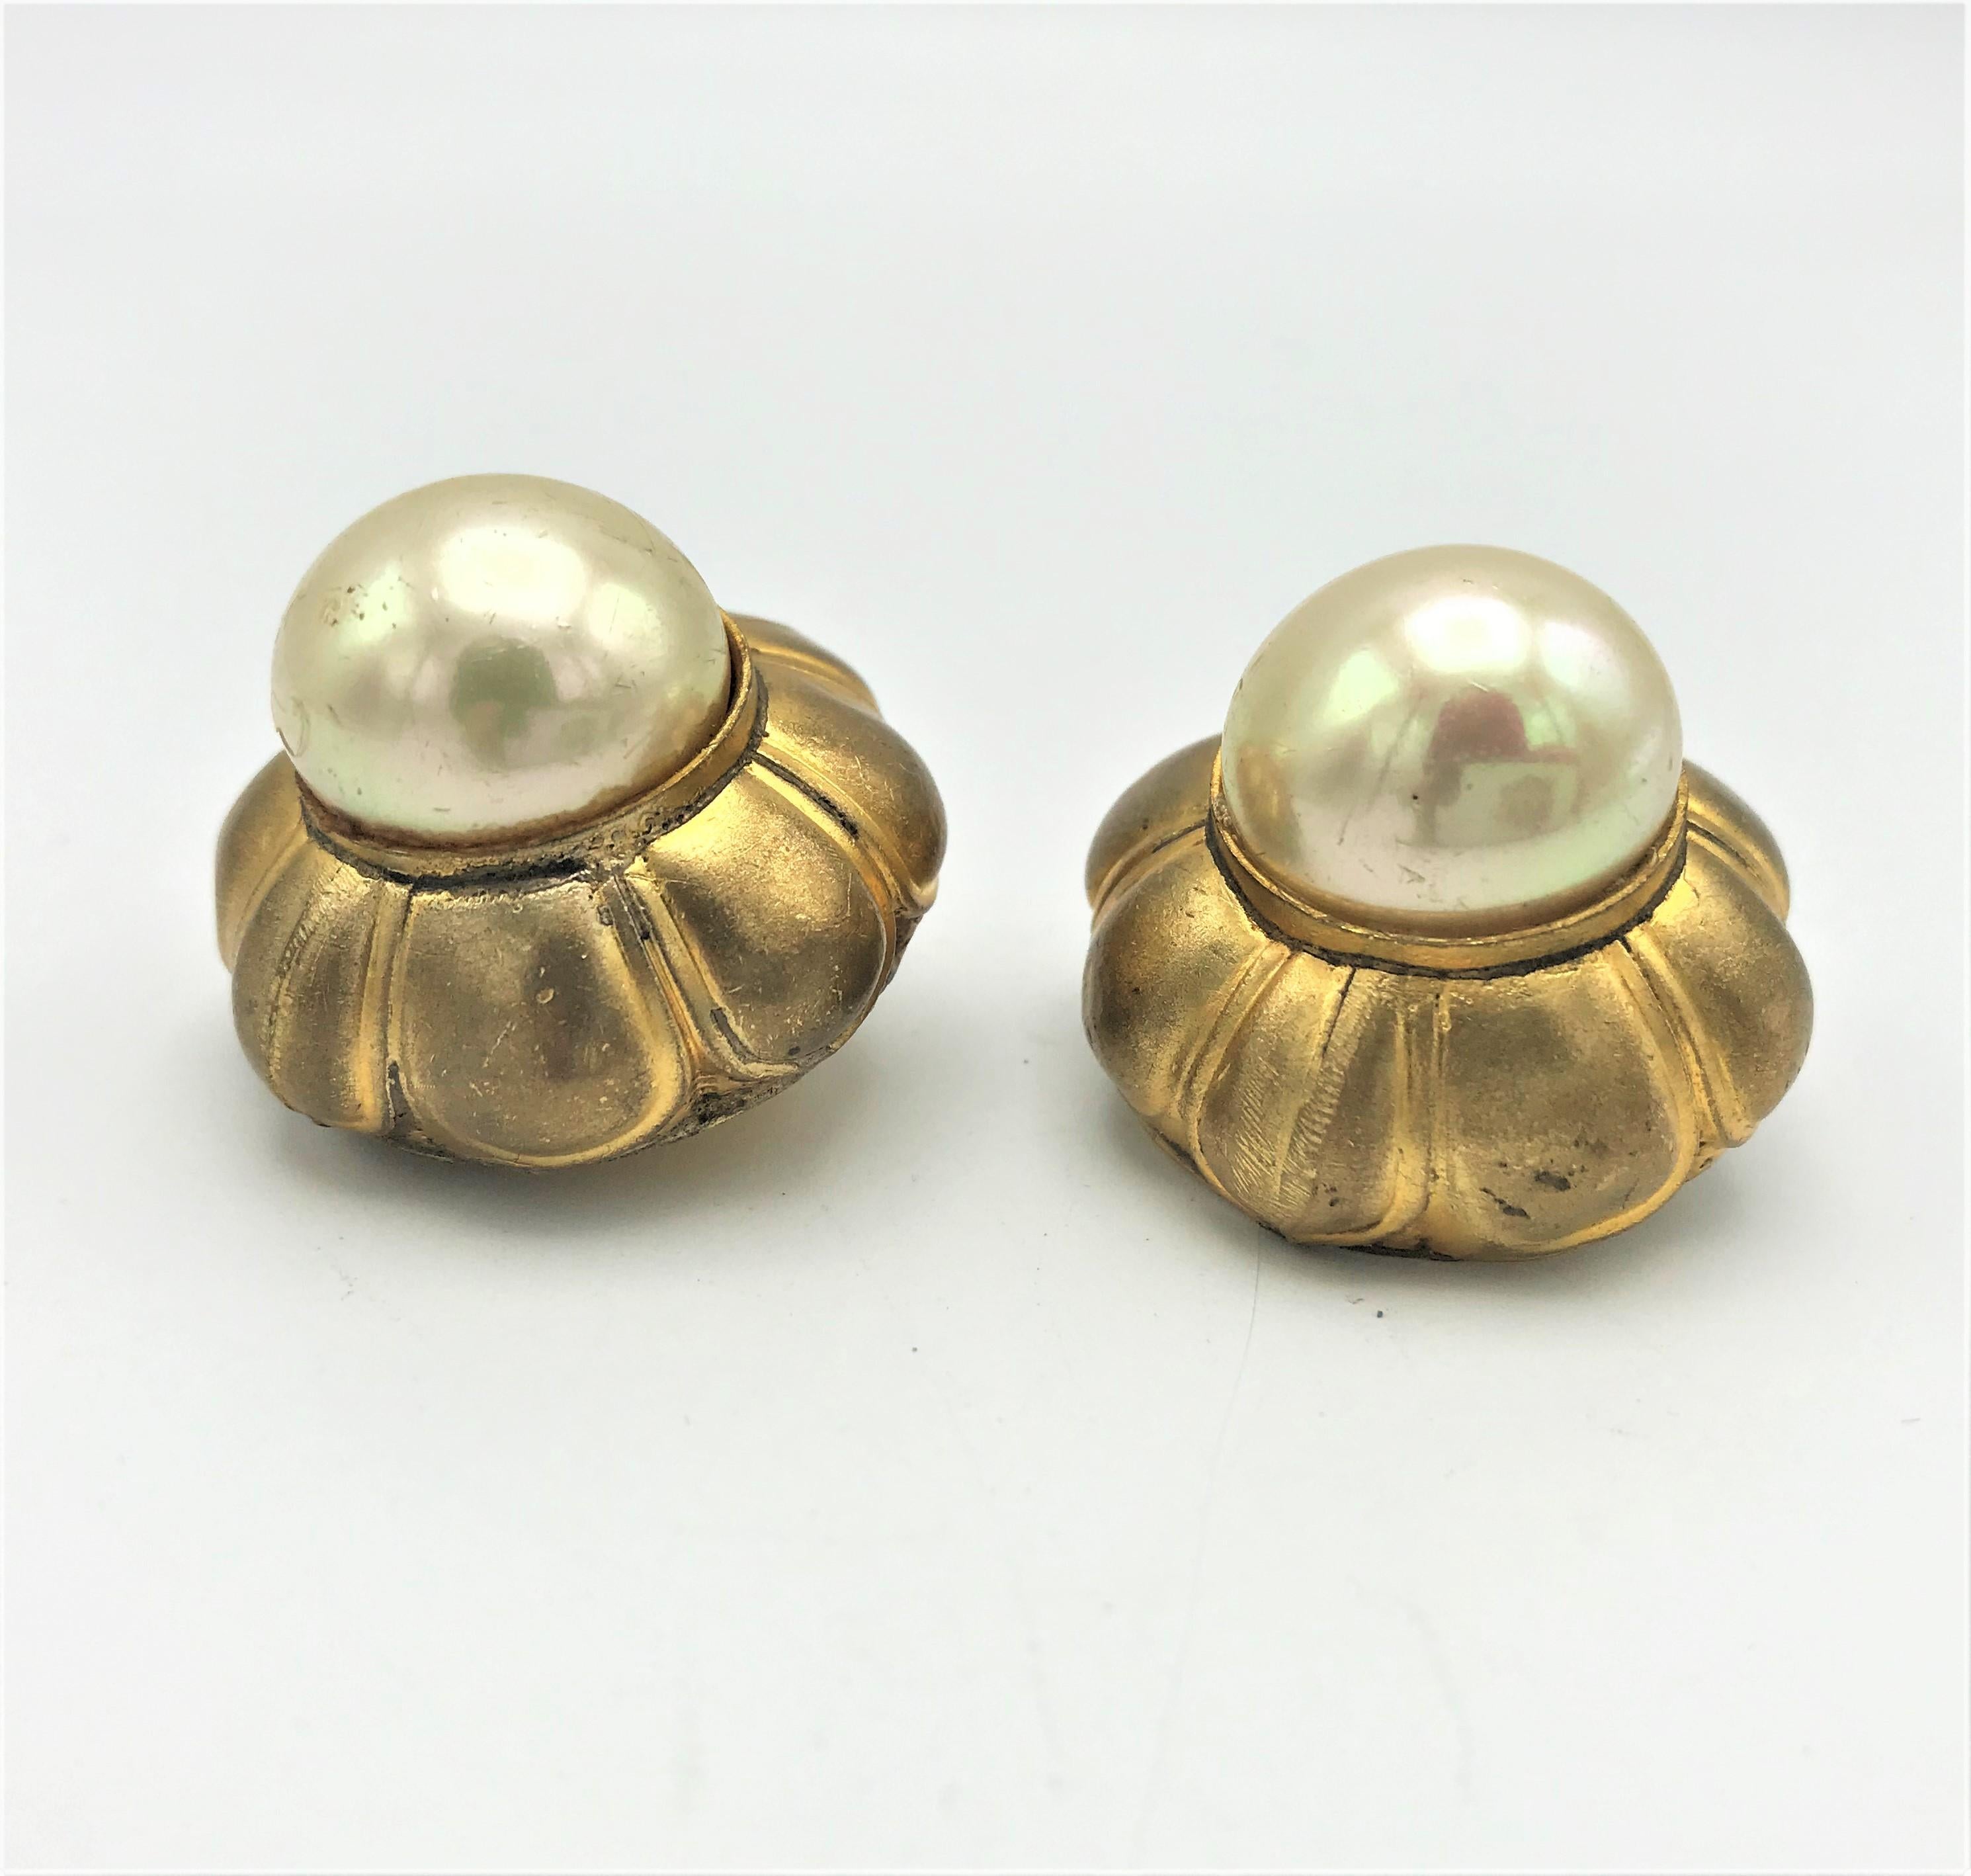 Modern  CHANEL clip-on earring, rund, barock pearl, not signed, 1970s, gilt metal For Sale